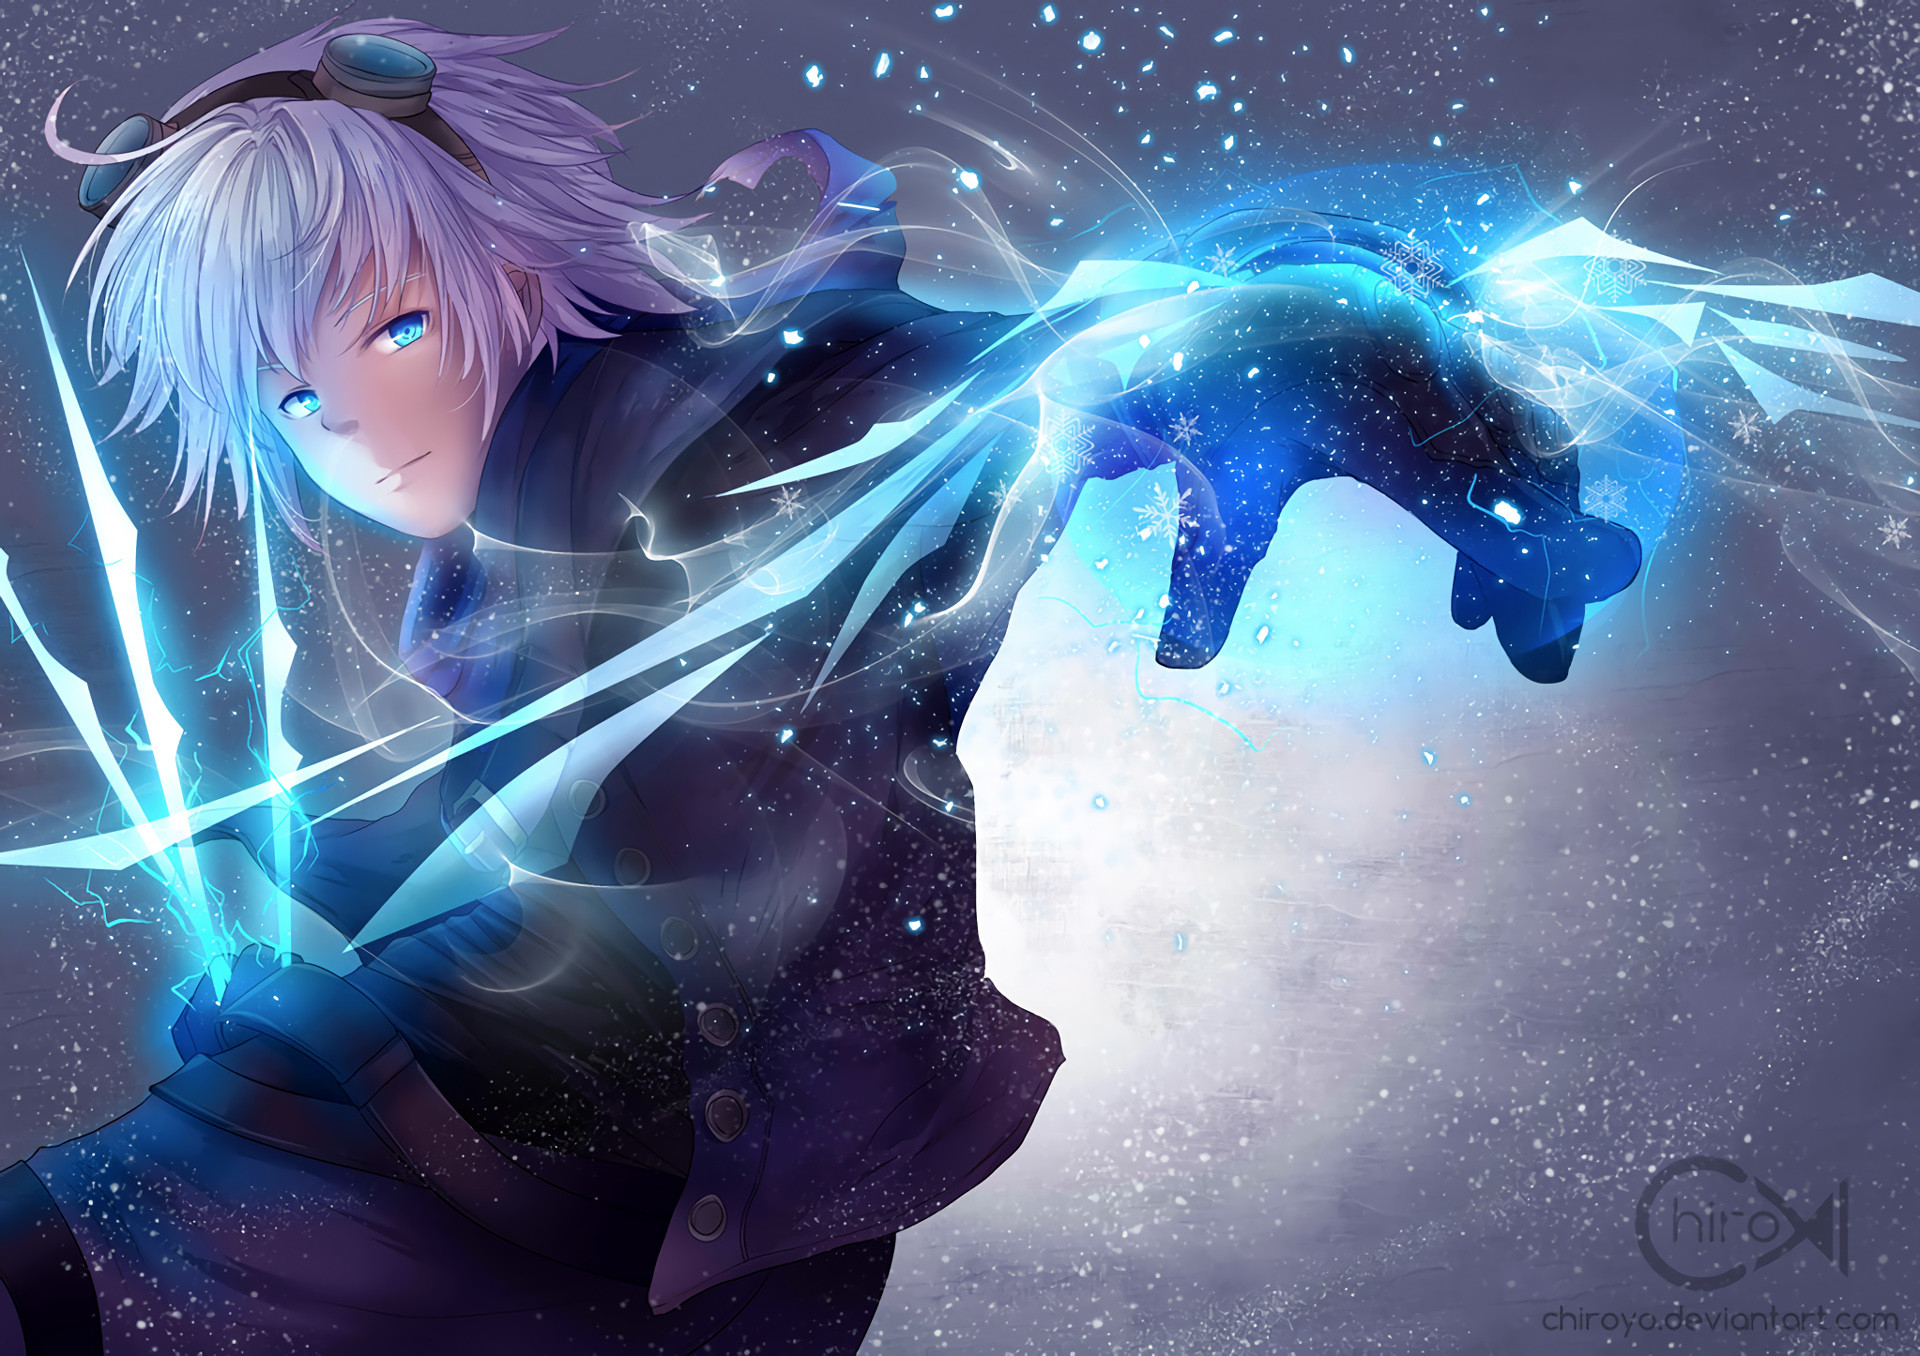 1920x1356 Frosted Ezreal by ã¡ãã (2) HD Wallpaper Fan Art Artwork League of Legends